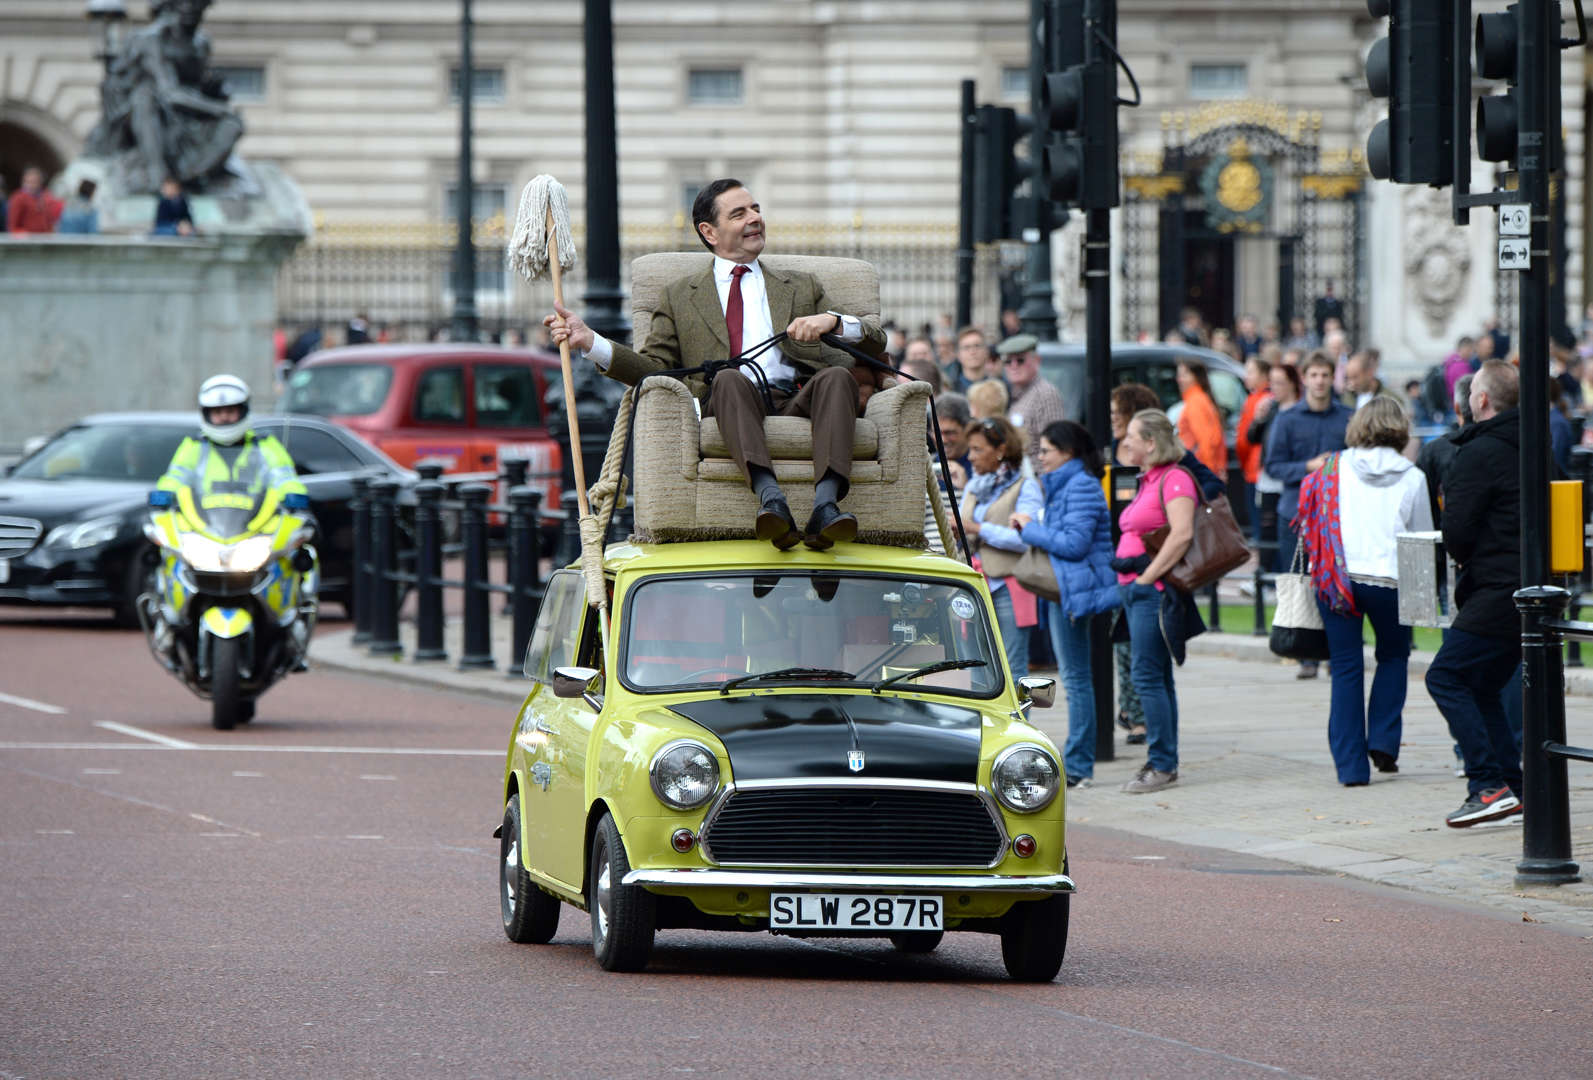 Rowan Atkinson as Mr Bean at Buckingham Palace to launch the new Mr Bean DVD and to celebrate the 25th Anniversary of the character's creation.